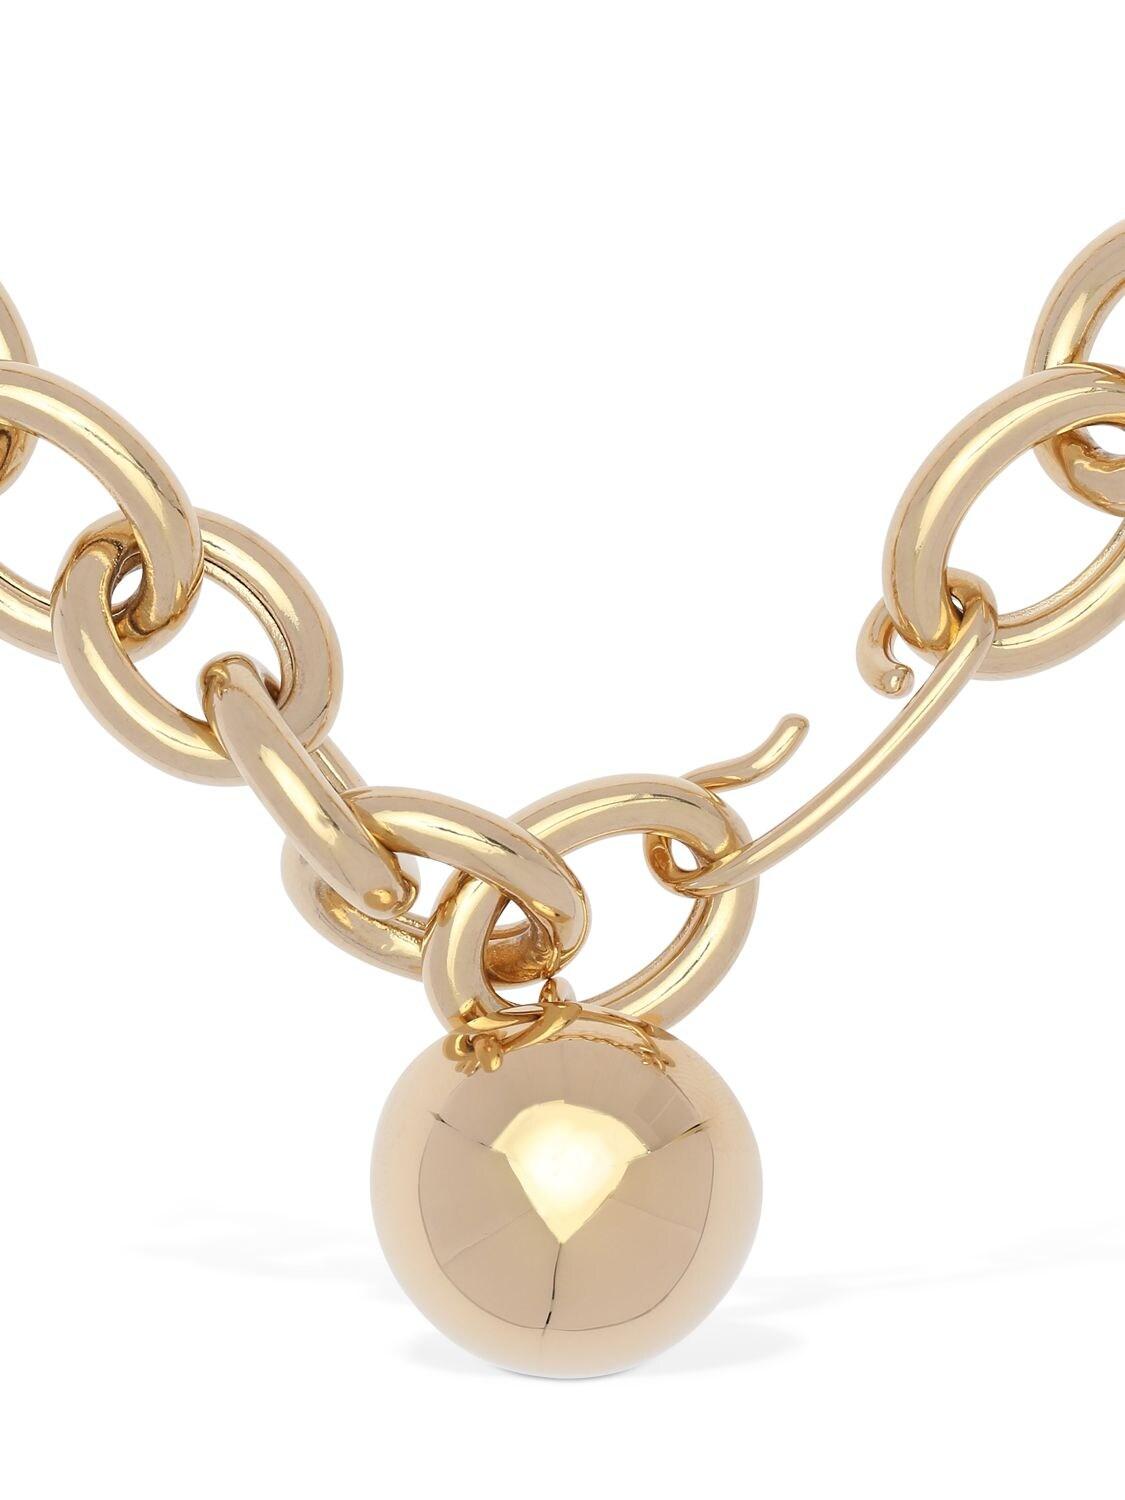 Jil Sander Chunky Chain & Sphere Necklace in Gold (Metallic) - Lyst